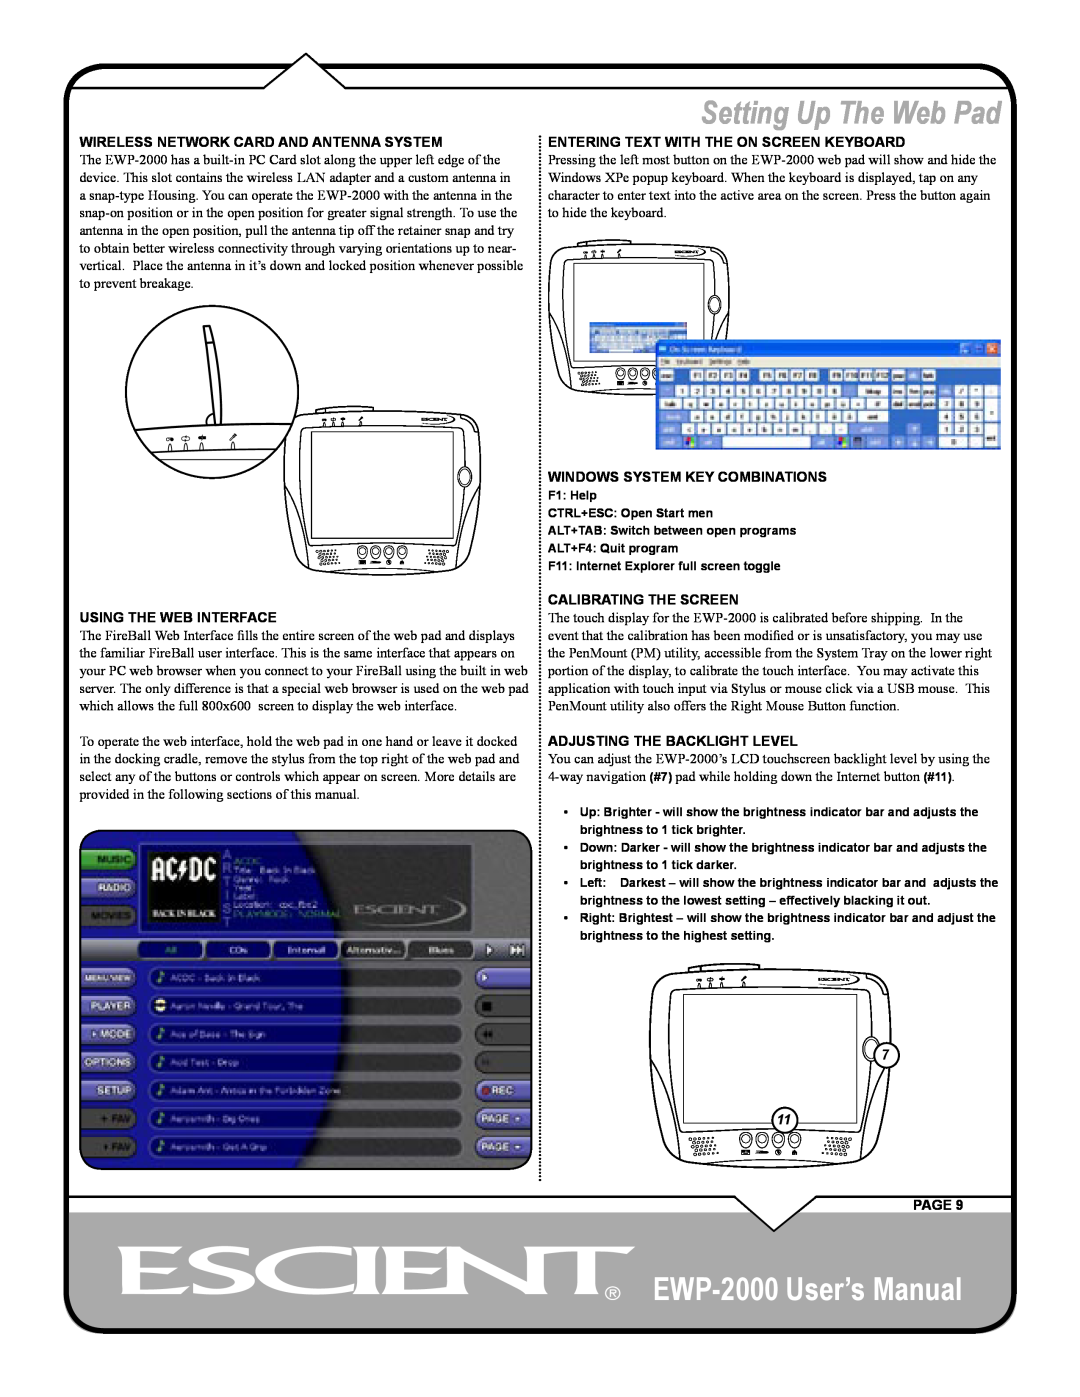 Escient user manual Setting Up The Web Pad, EWP-2000 User’s Manual, Wireless Network Card And Antenna System, Page 